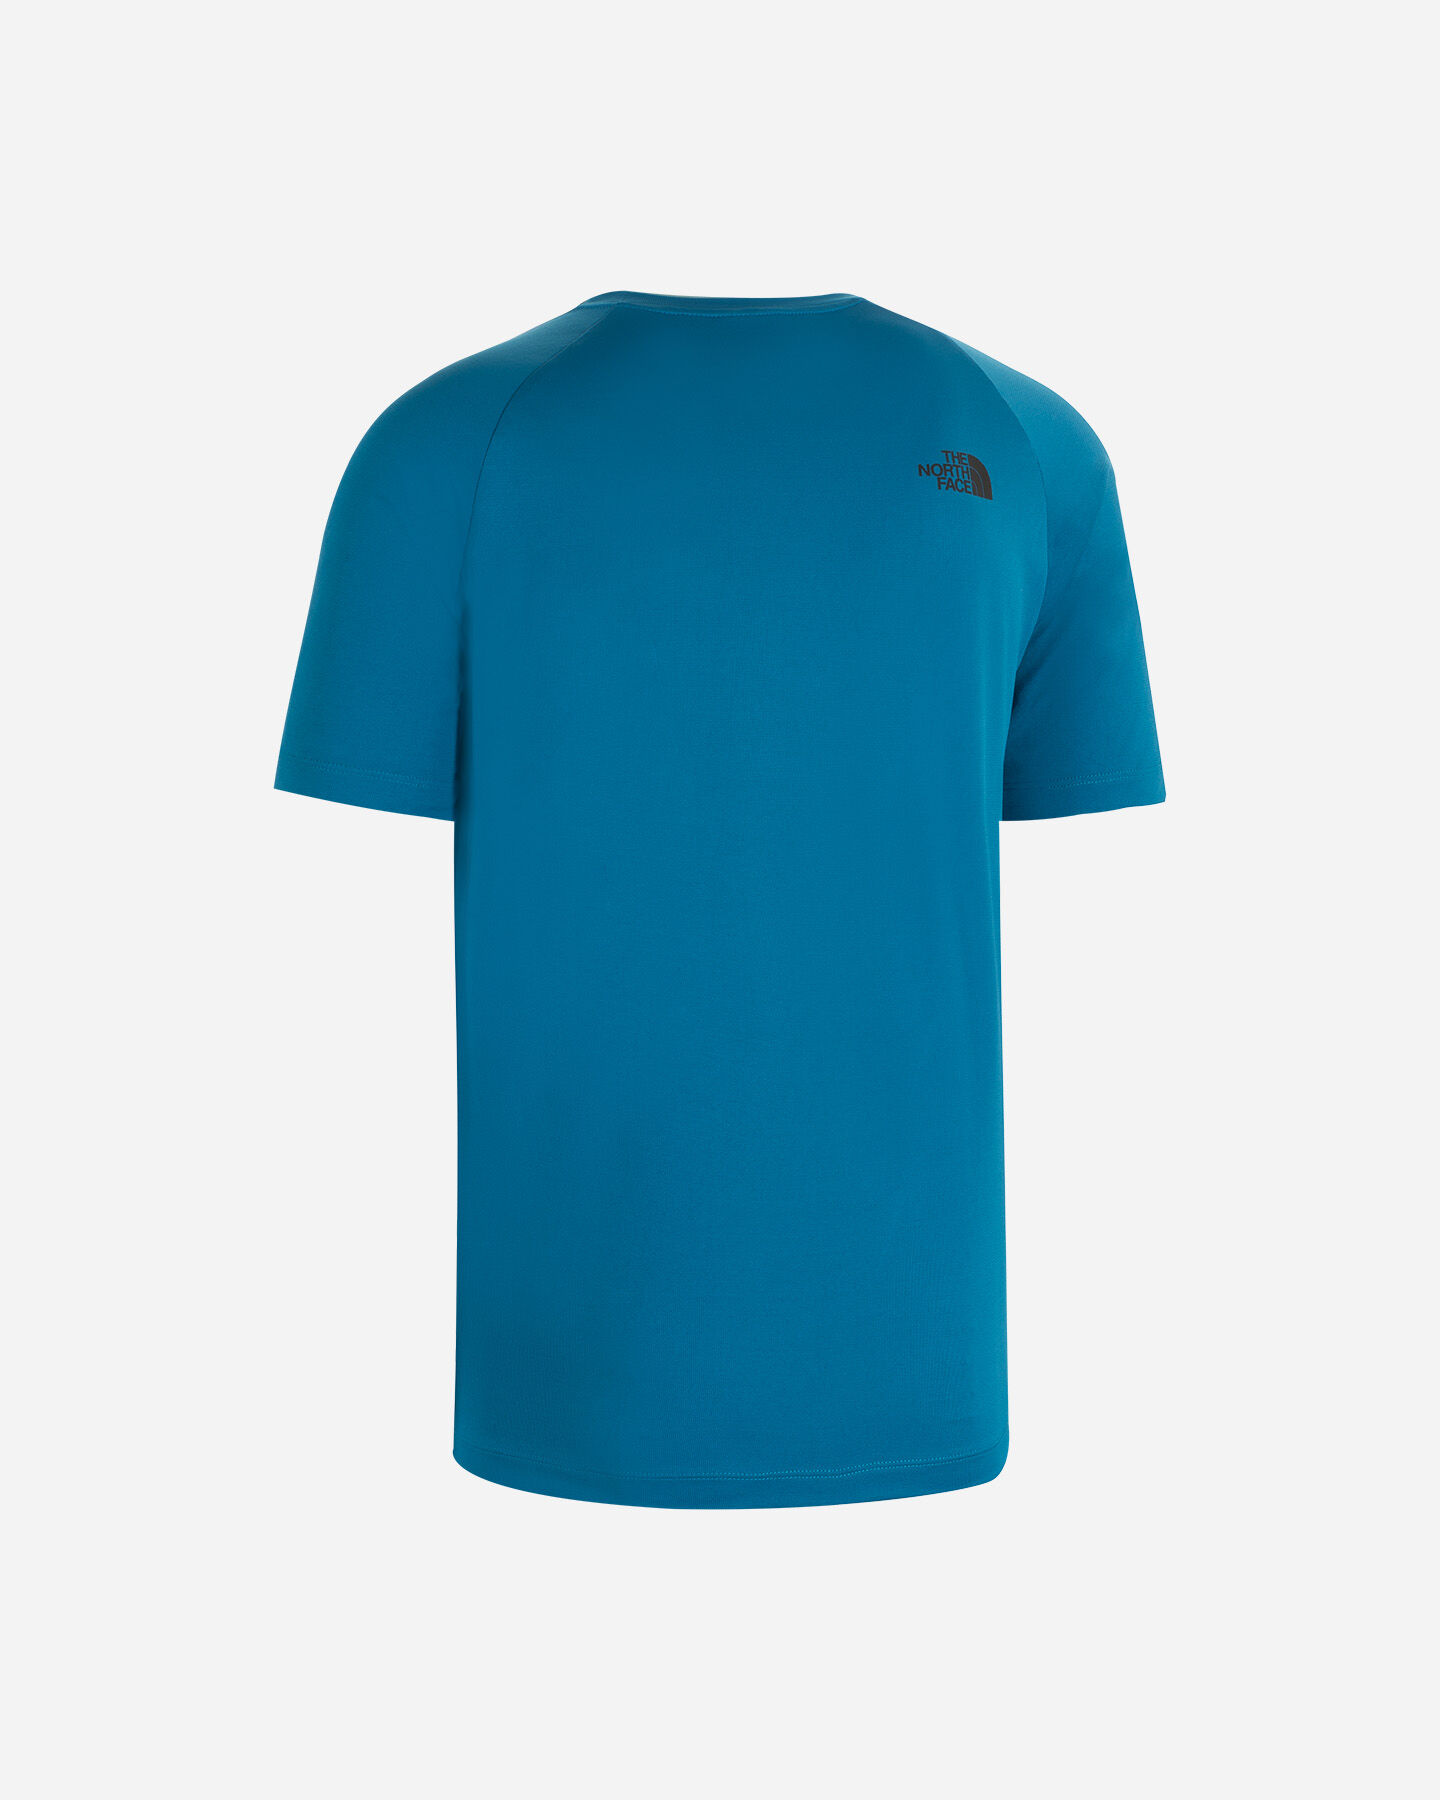  T-Shirt THE NORTH FACE ODLES TECH M S5430742 scatto 1